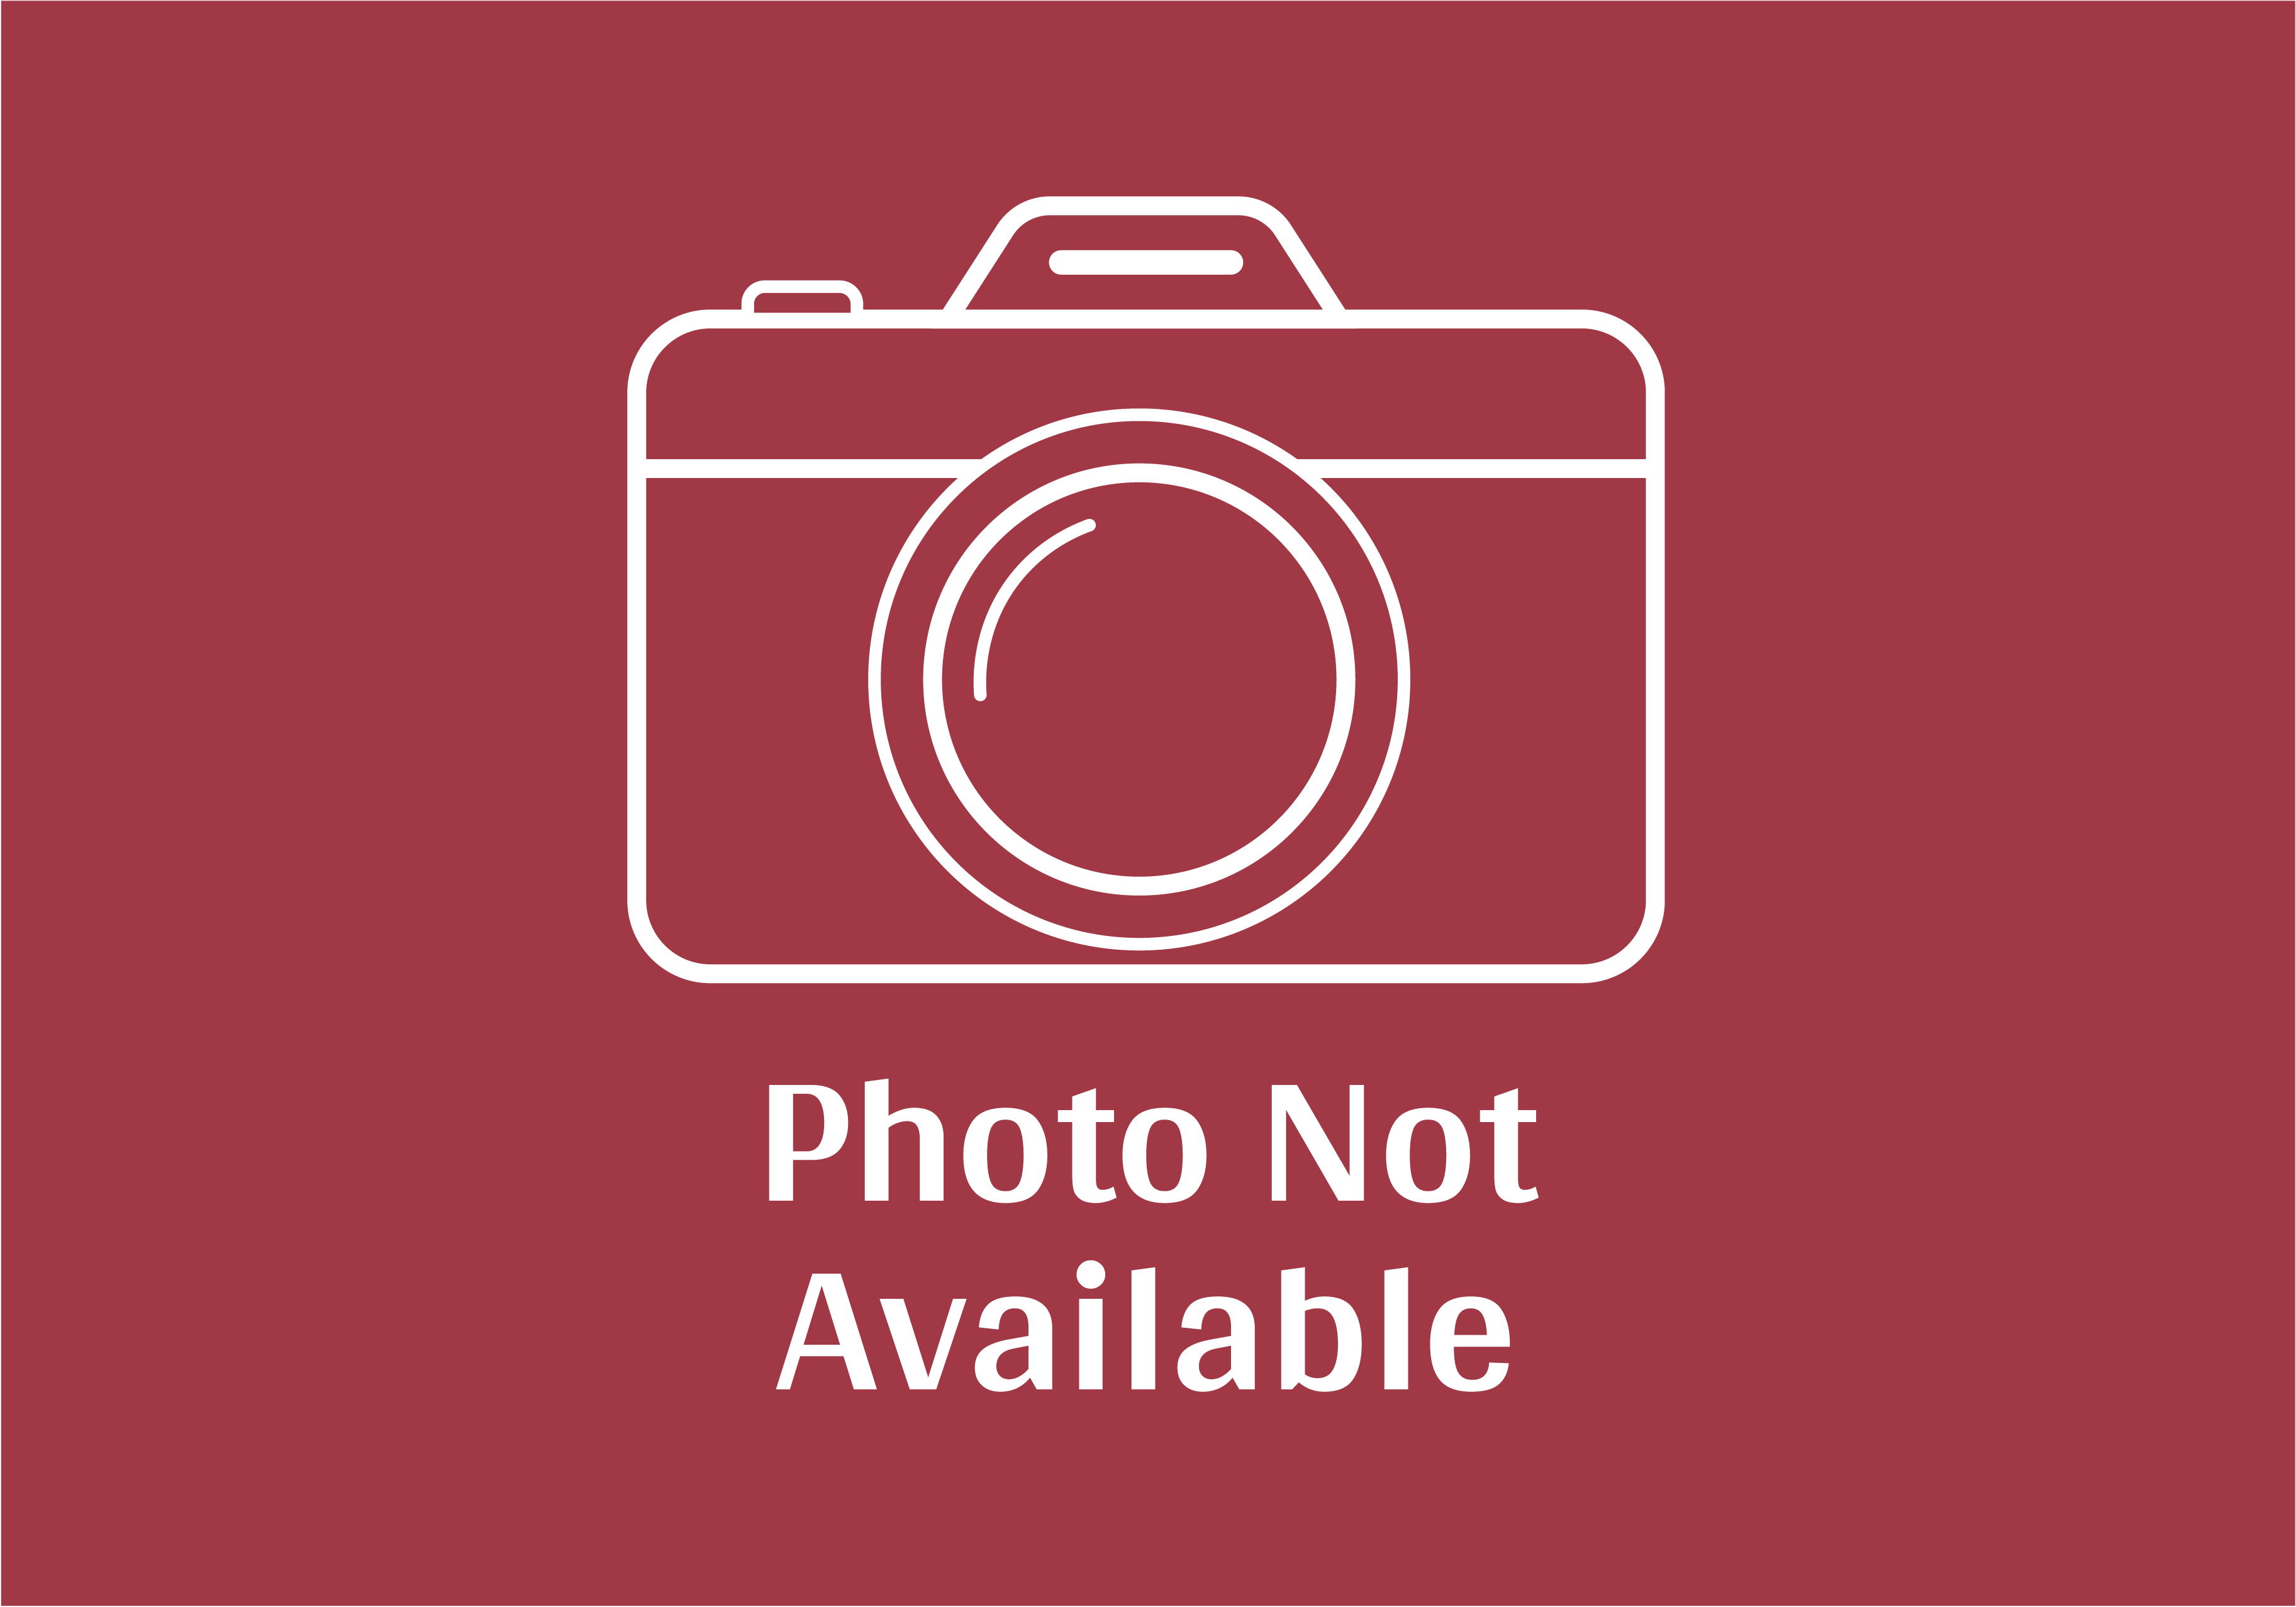 camera with text "photo not available"